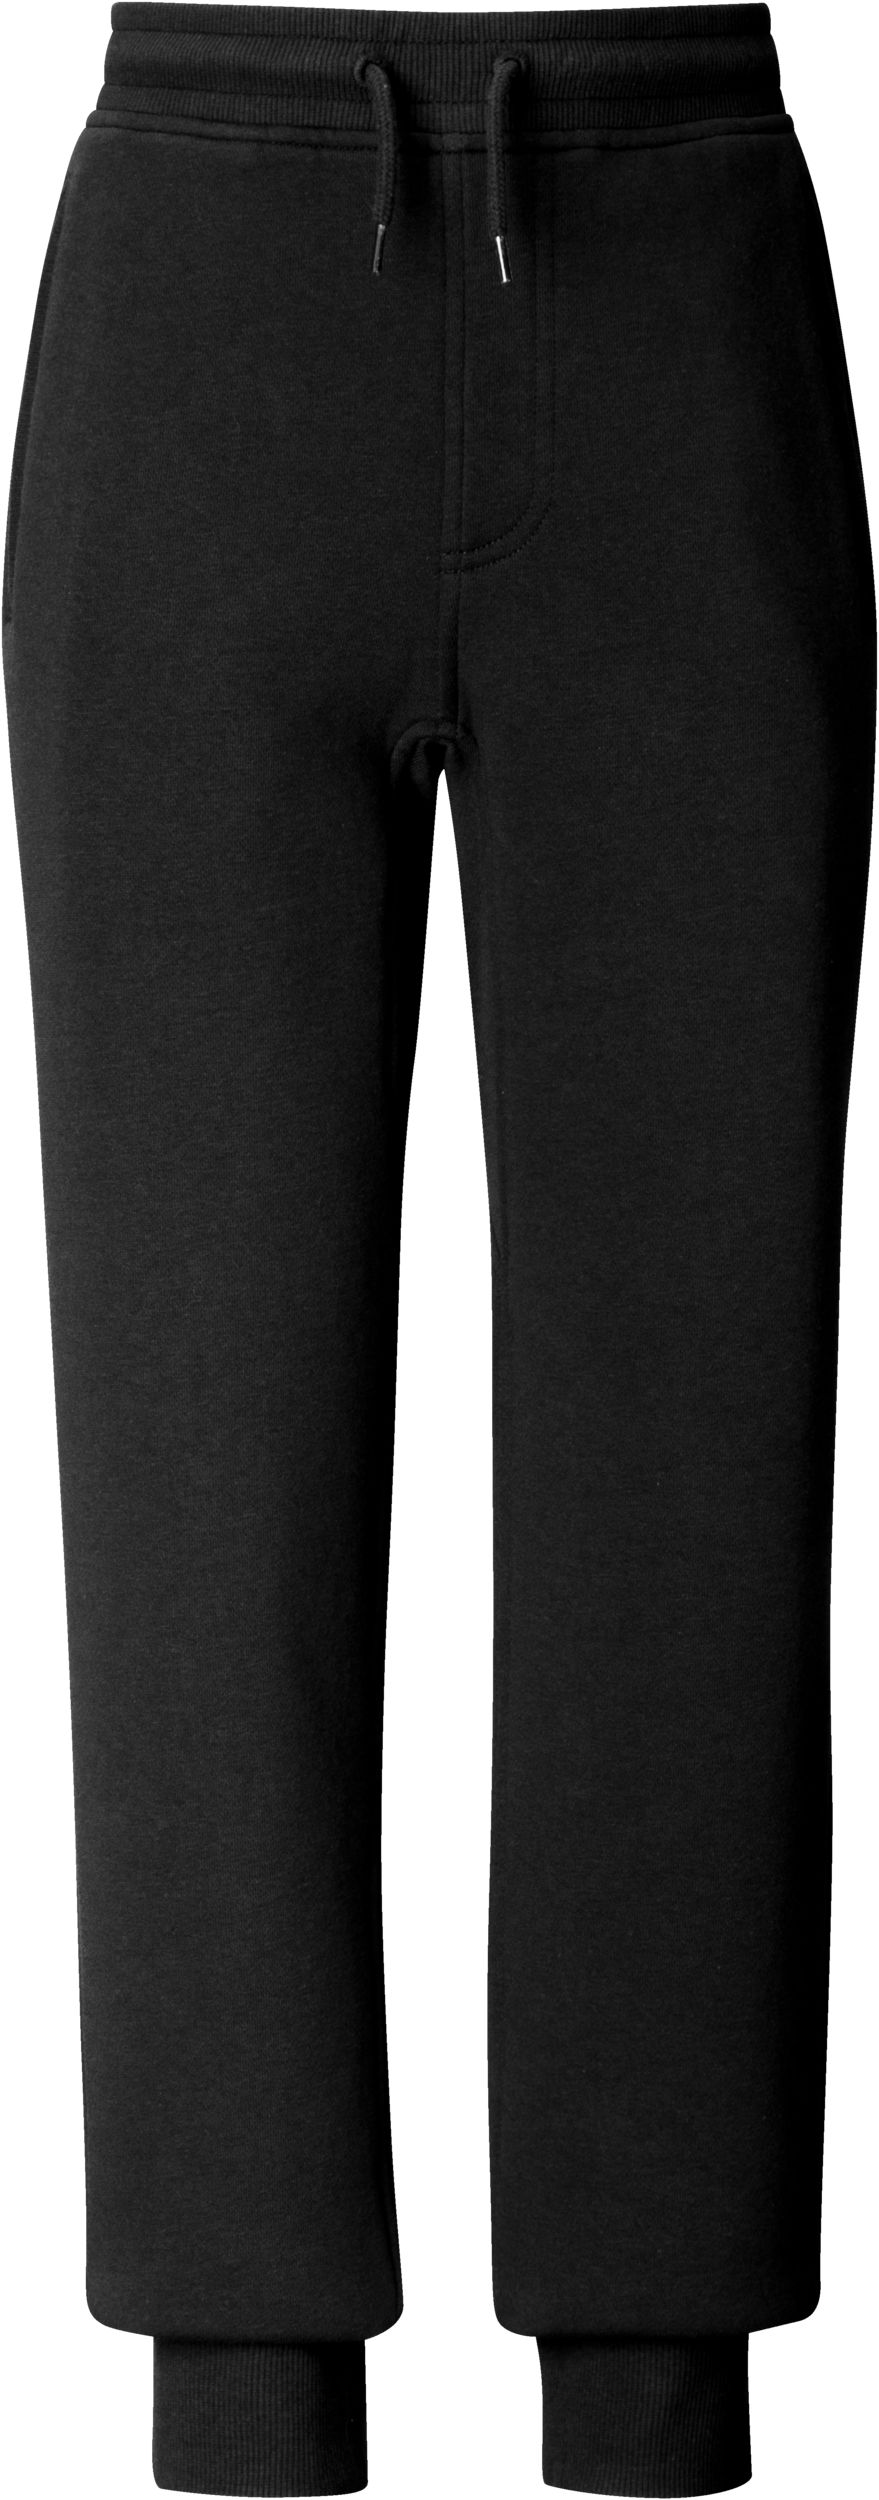 Ripzone Boys' Roe Sweatpants, Kids', Tapered, Cuffed, Woven, Athletic ...